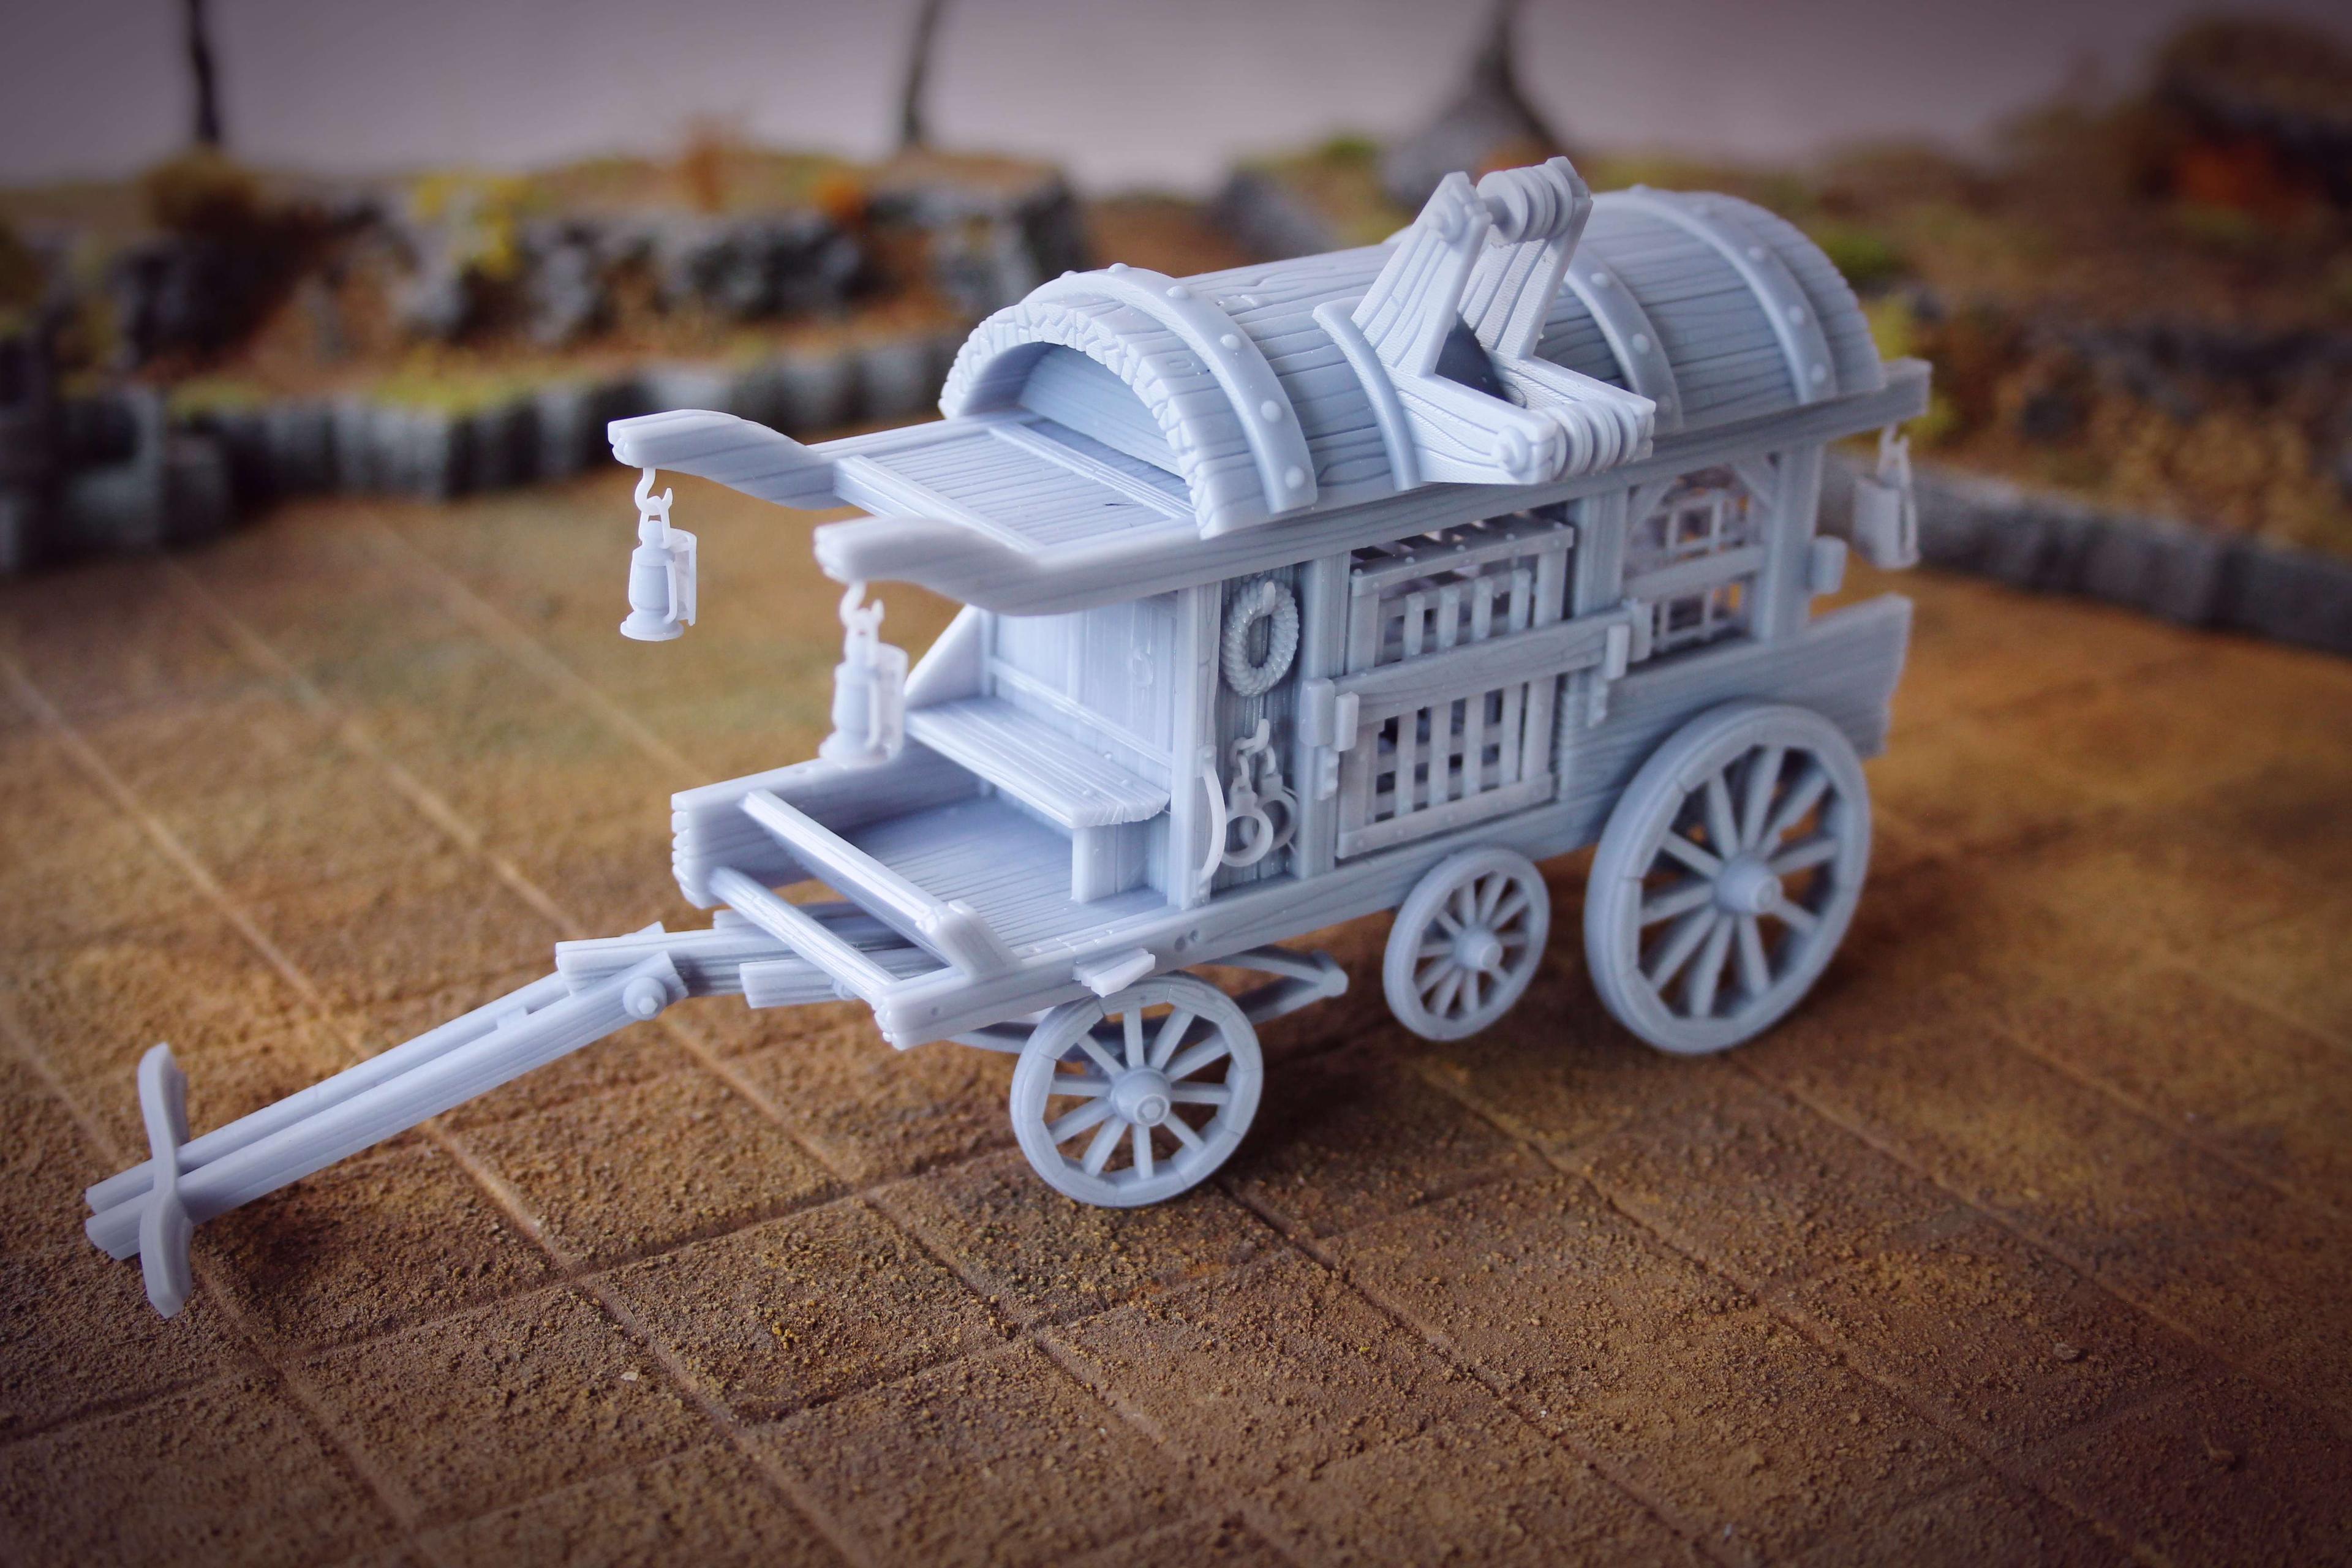 Hunters Wagon | TTRPG Trapper Expedition 3d model